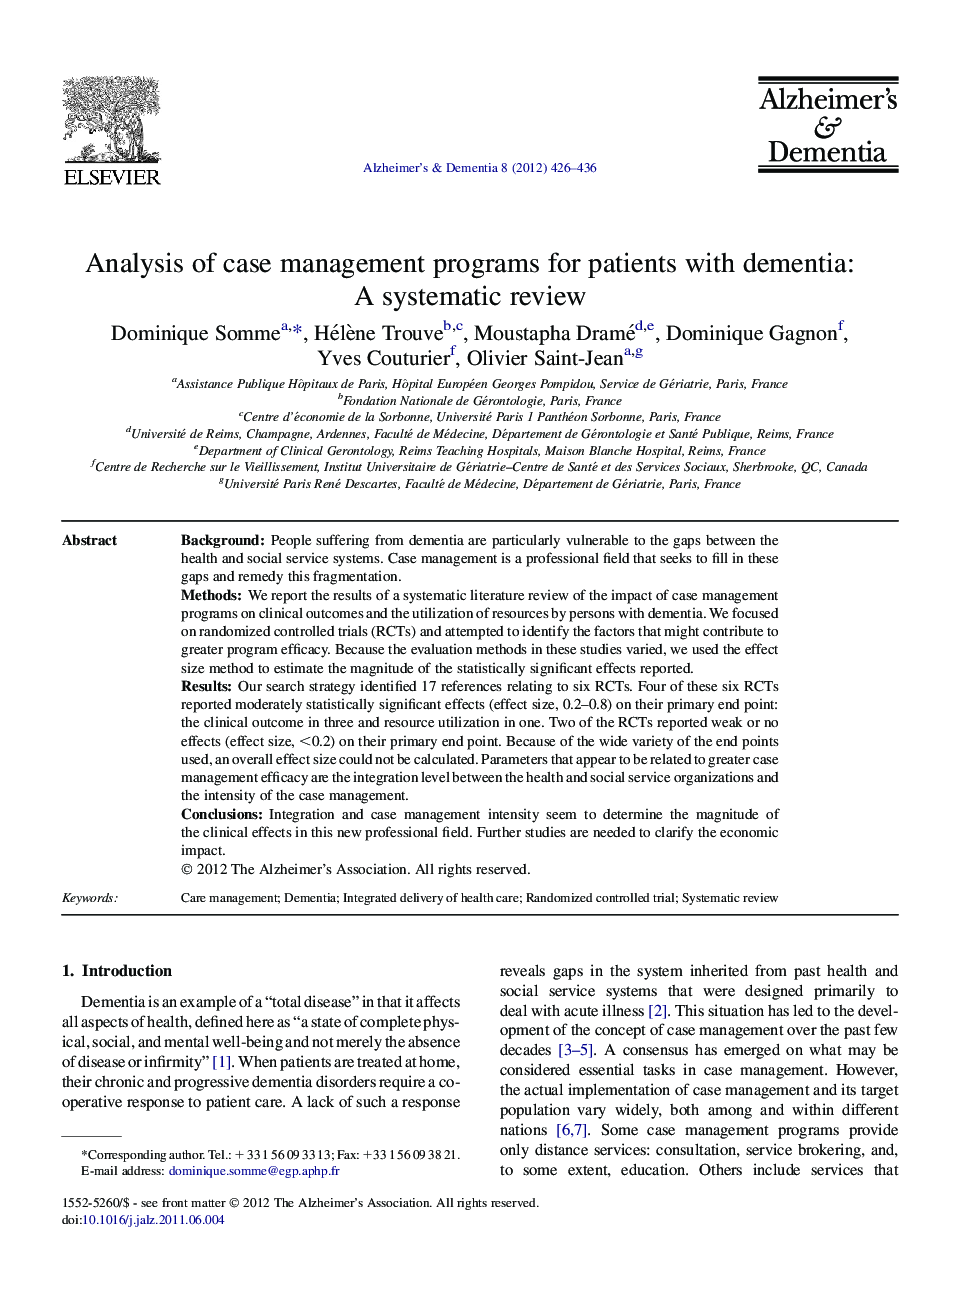 Analysis of case management programs for patients with dementia: A systematic review